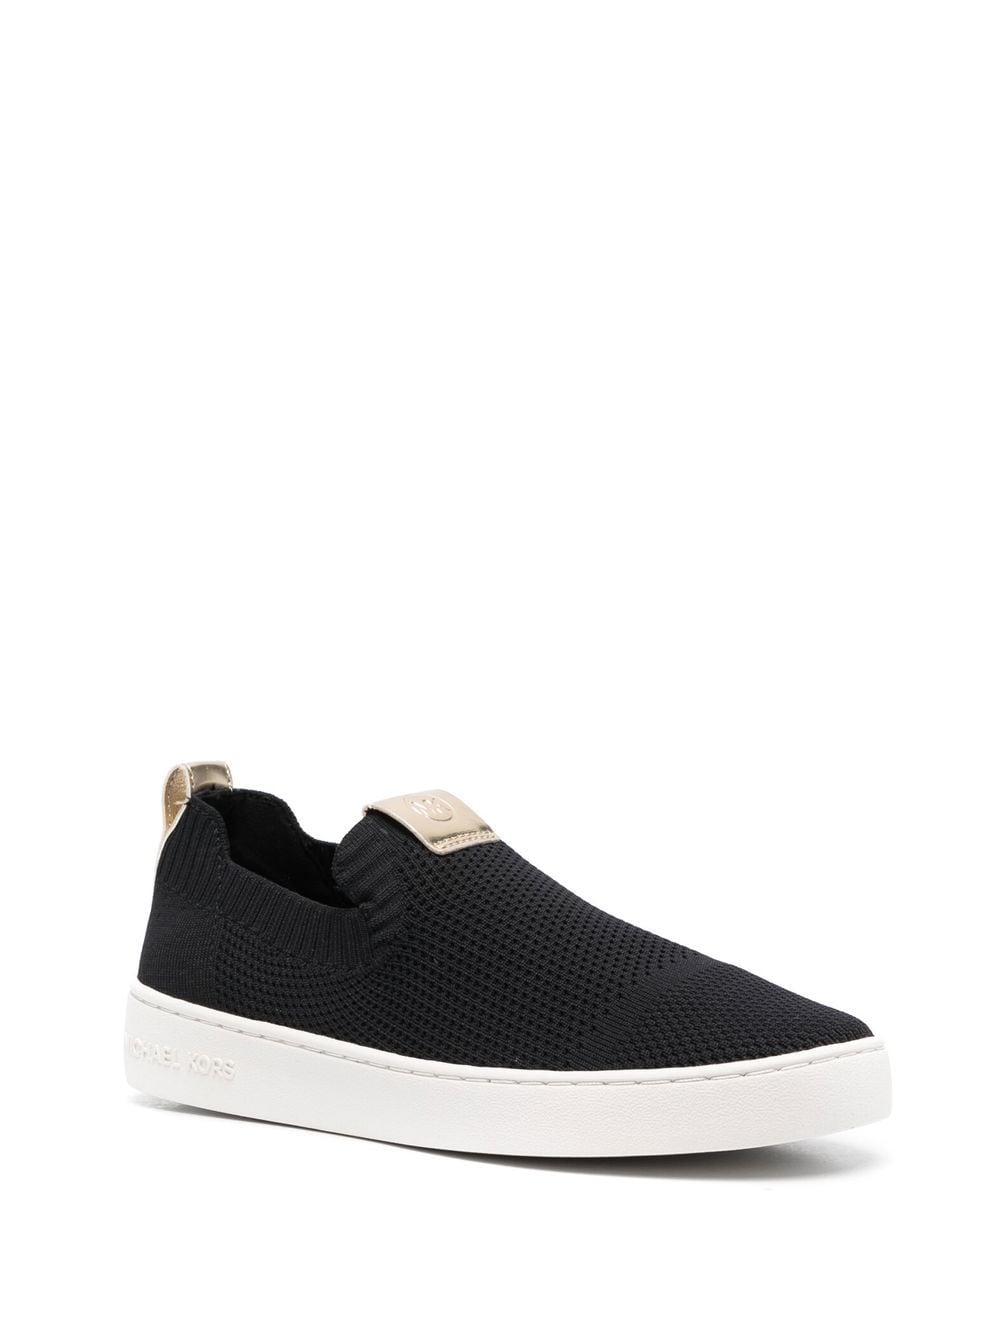 STRETCH KNIT SLIP-ON SNEAKERS